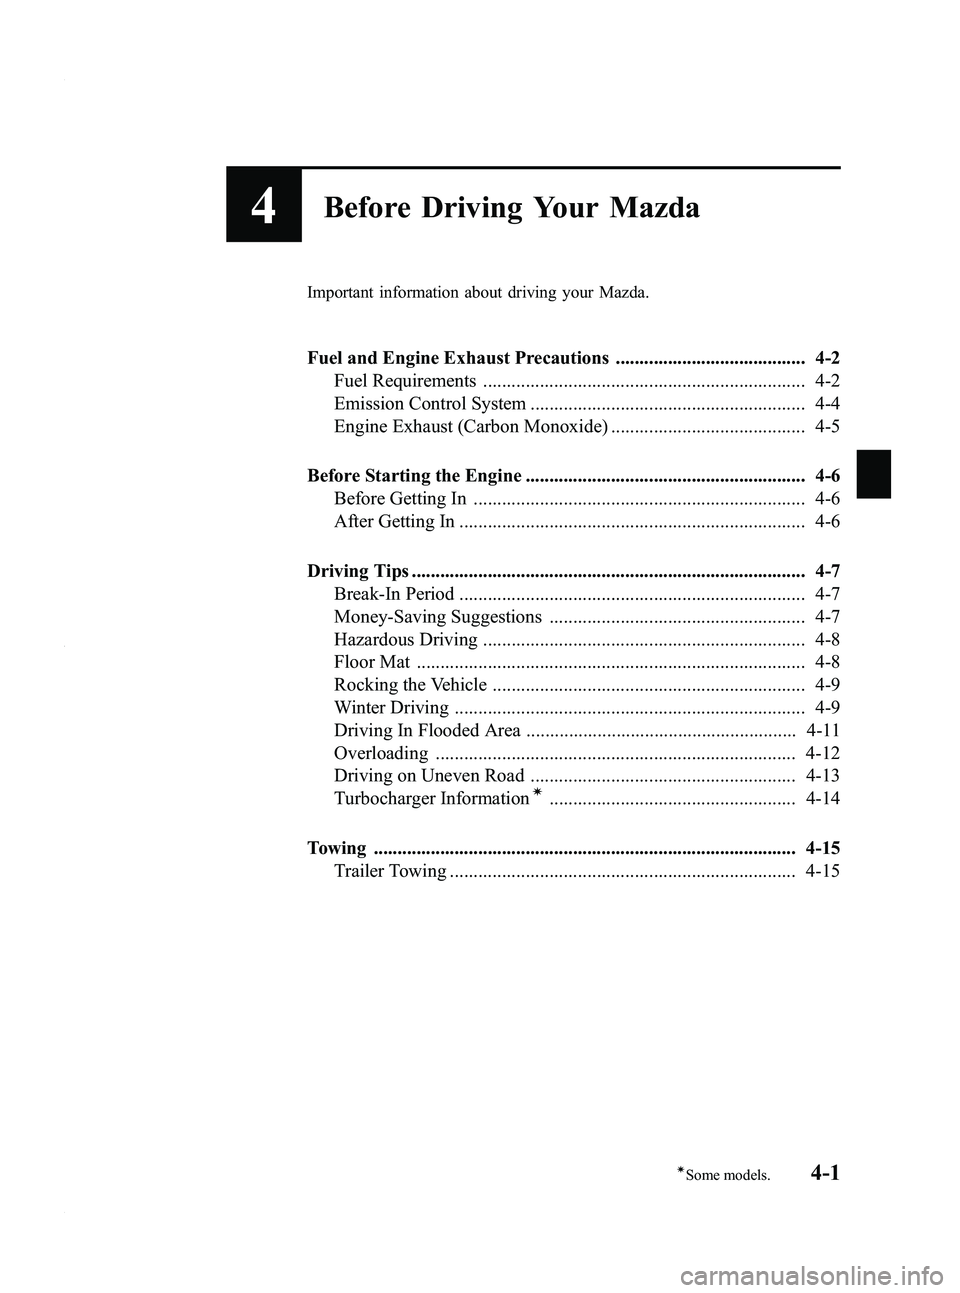 MAZDA MODEL 3 5-DOOR 2012  Owners Manual Black plate (149,1)
4Before Driving Your Mazda
Important information about driving your Mazda.
Fuel and Engine Exhaust Precautions ........................................ 4-2Fuel Requirements .......